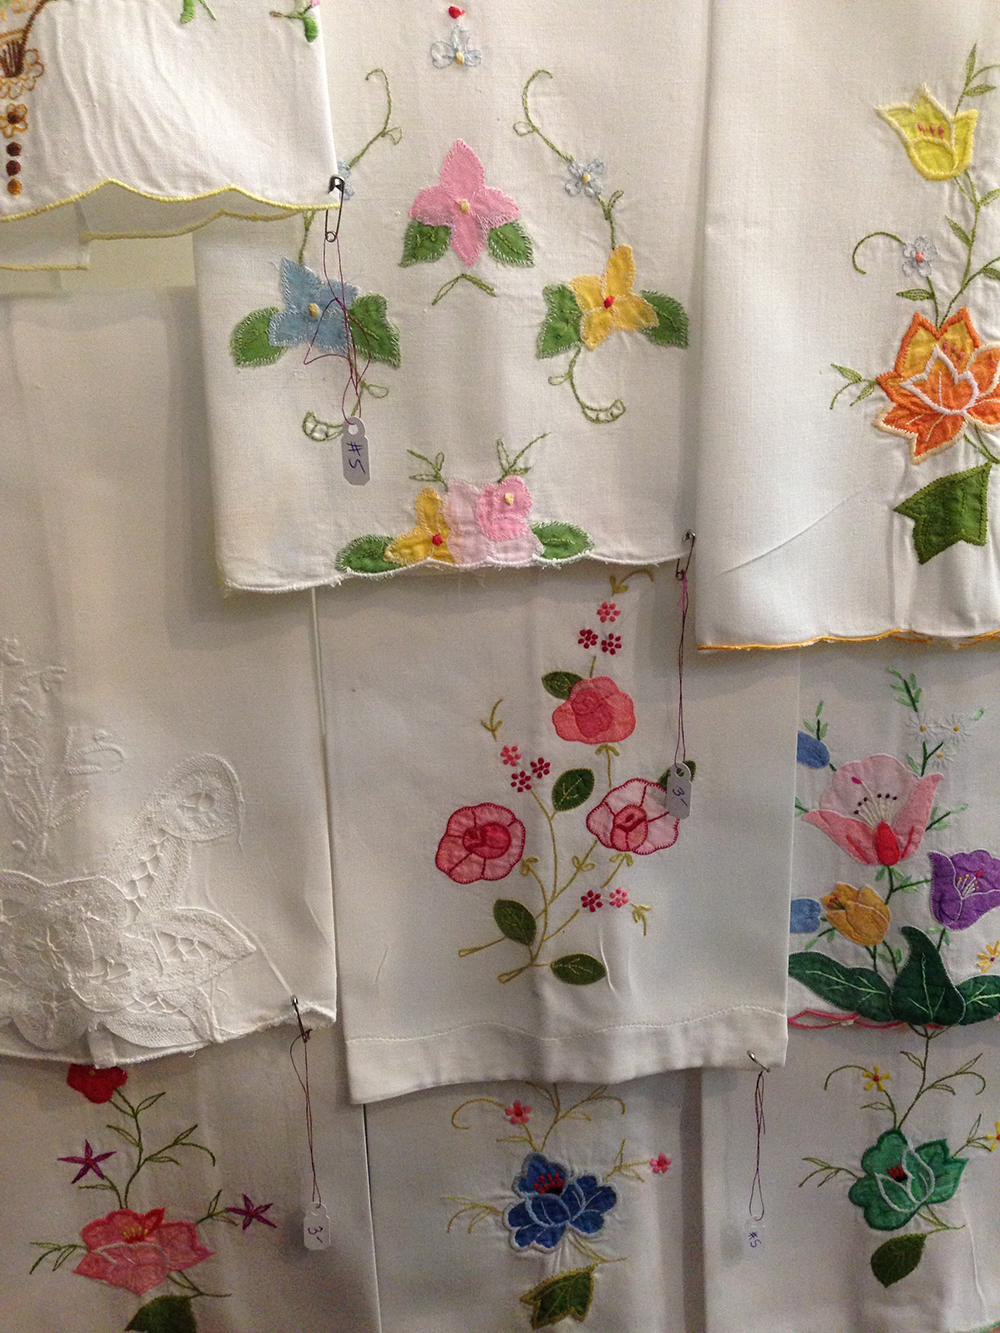 Vintage embroidered handkerchiefs - Art Inspiration and Thrifting